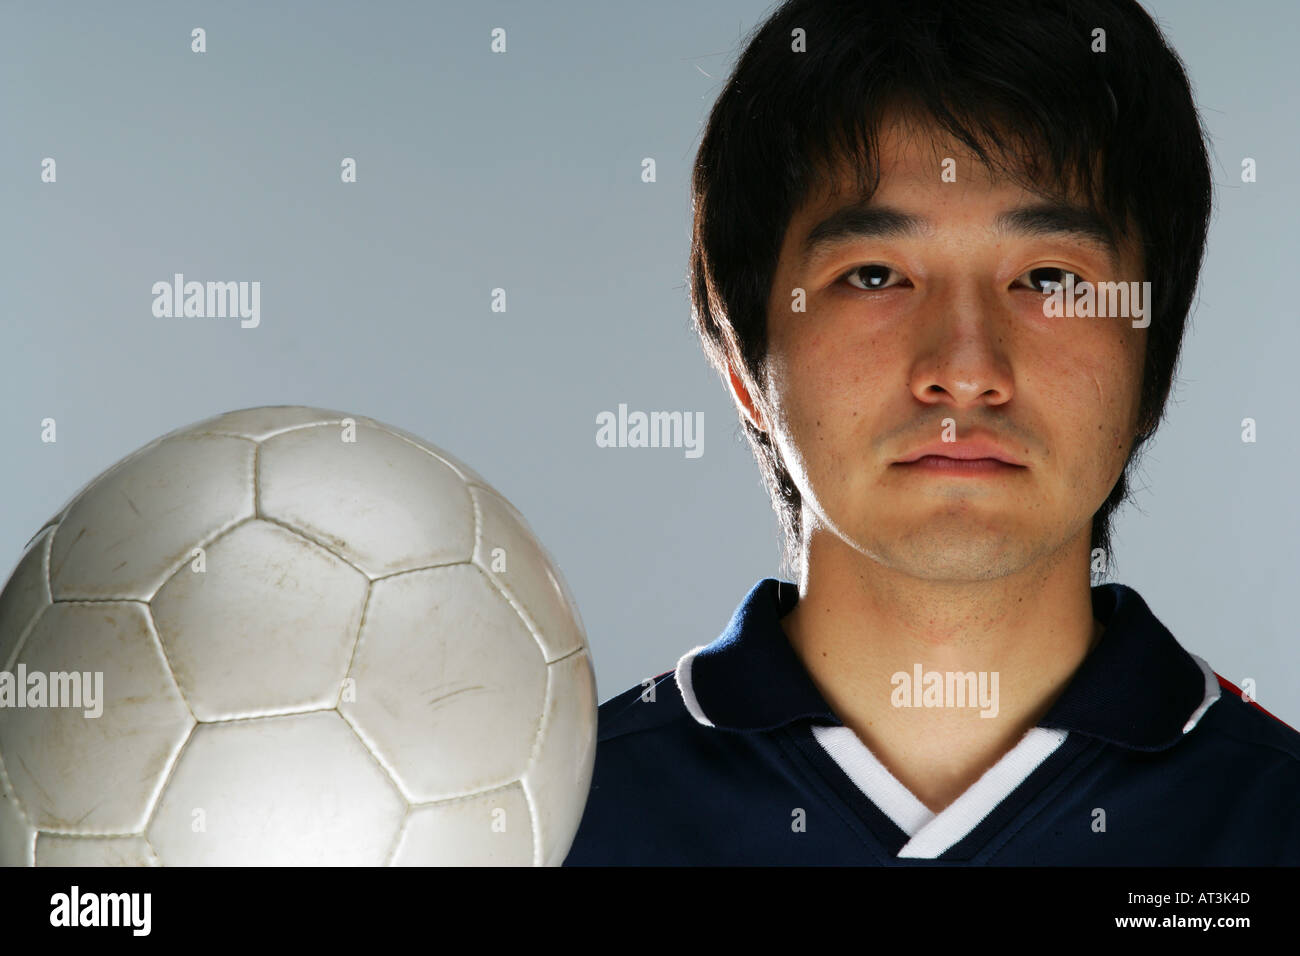 Determined soccer player holding ball Stock Photo